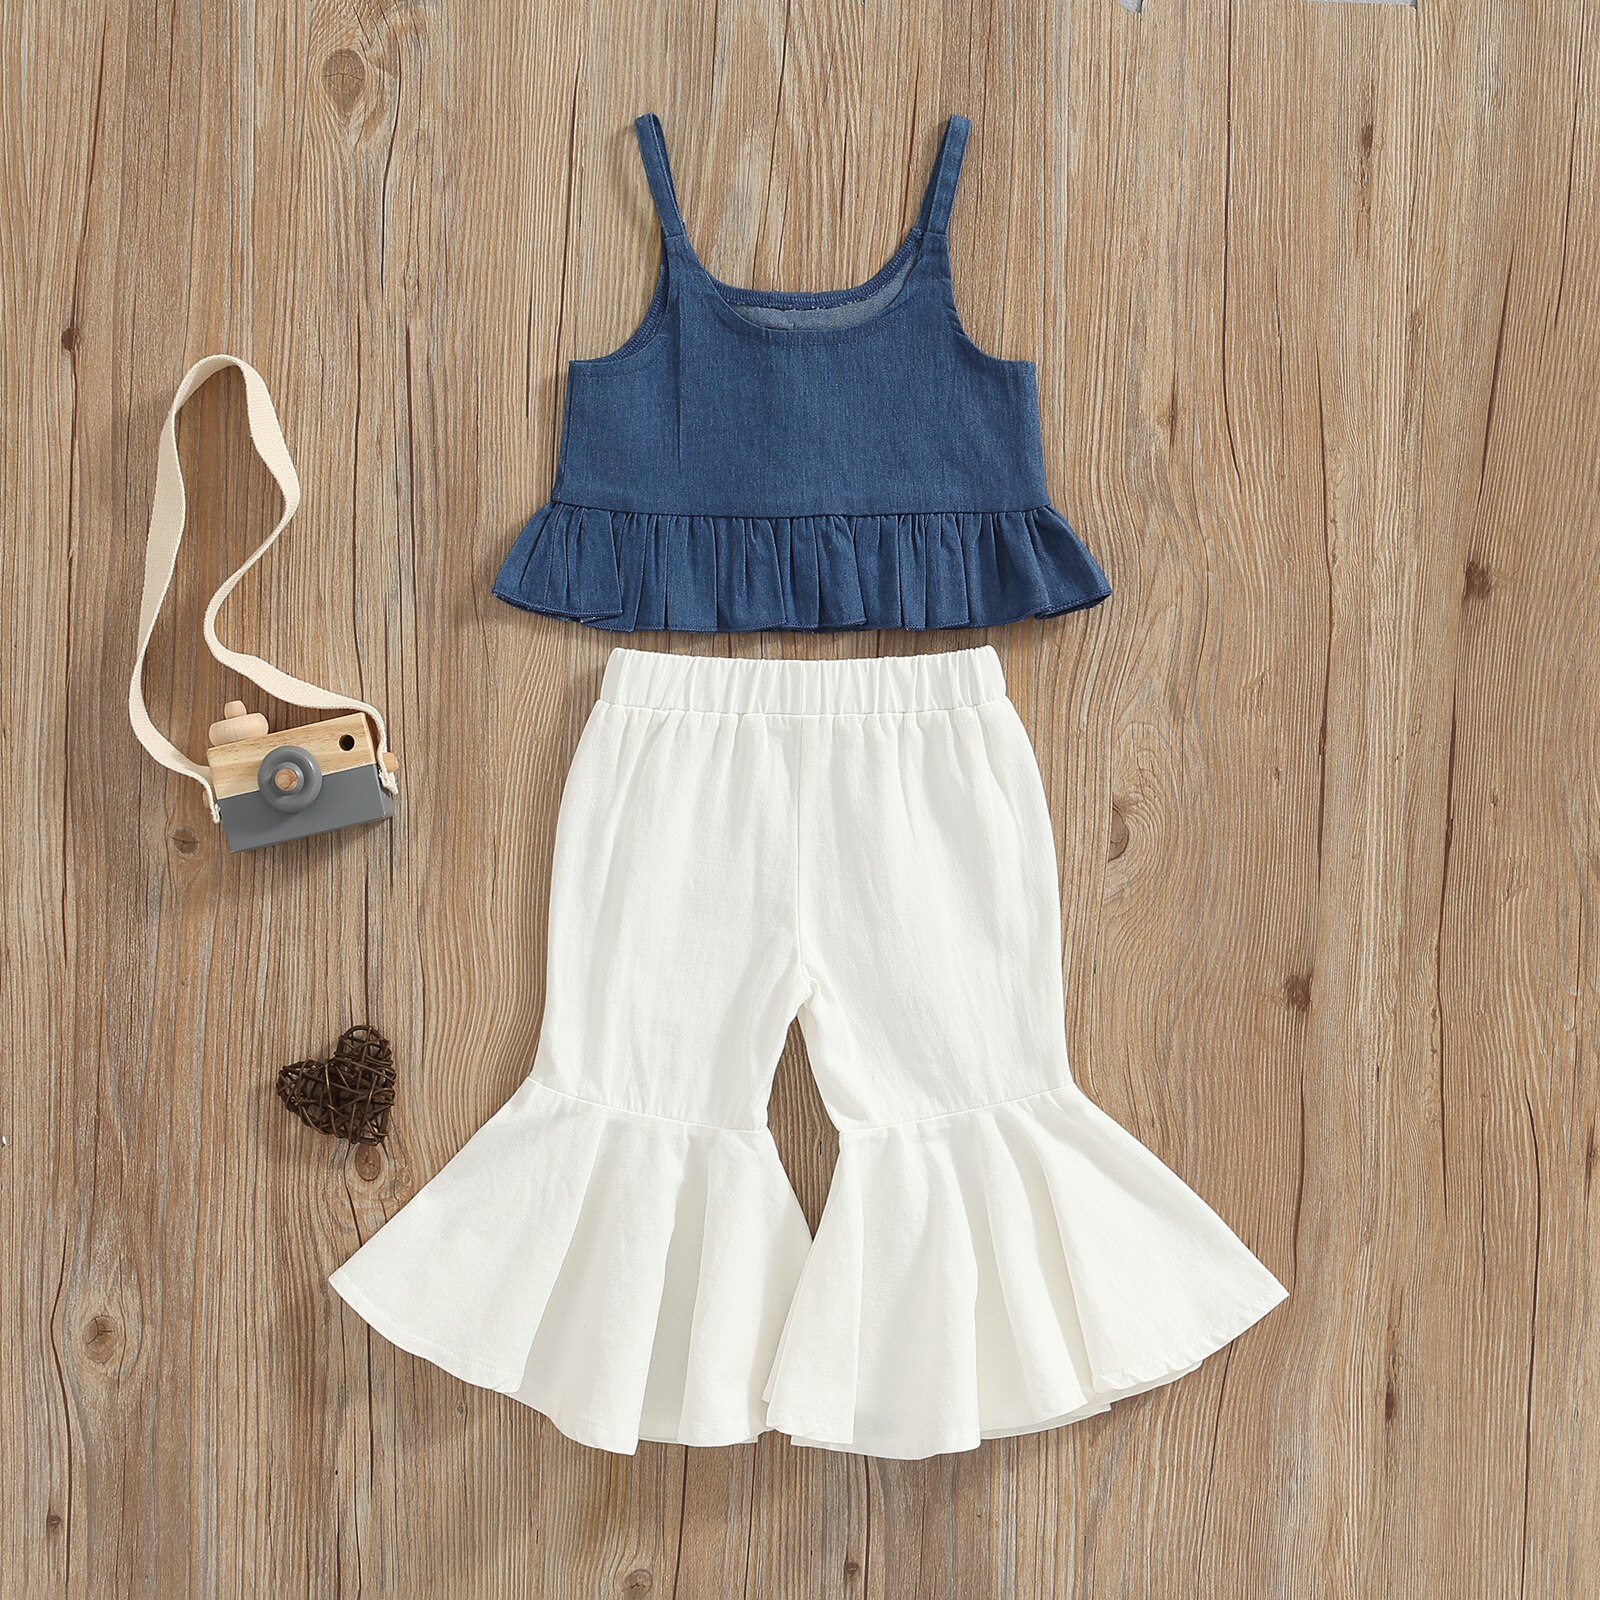 Girls-Clothing-Set-Children-Two-piece-Summer-Clothes-Set-Blue-U-neck-Sleeveless-Tank-Top-and-1